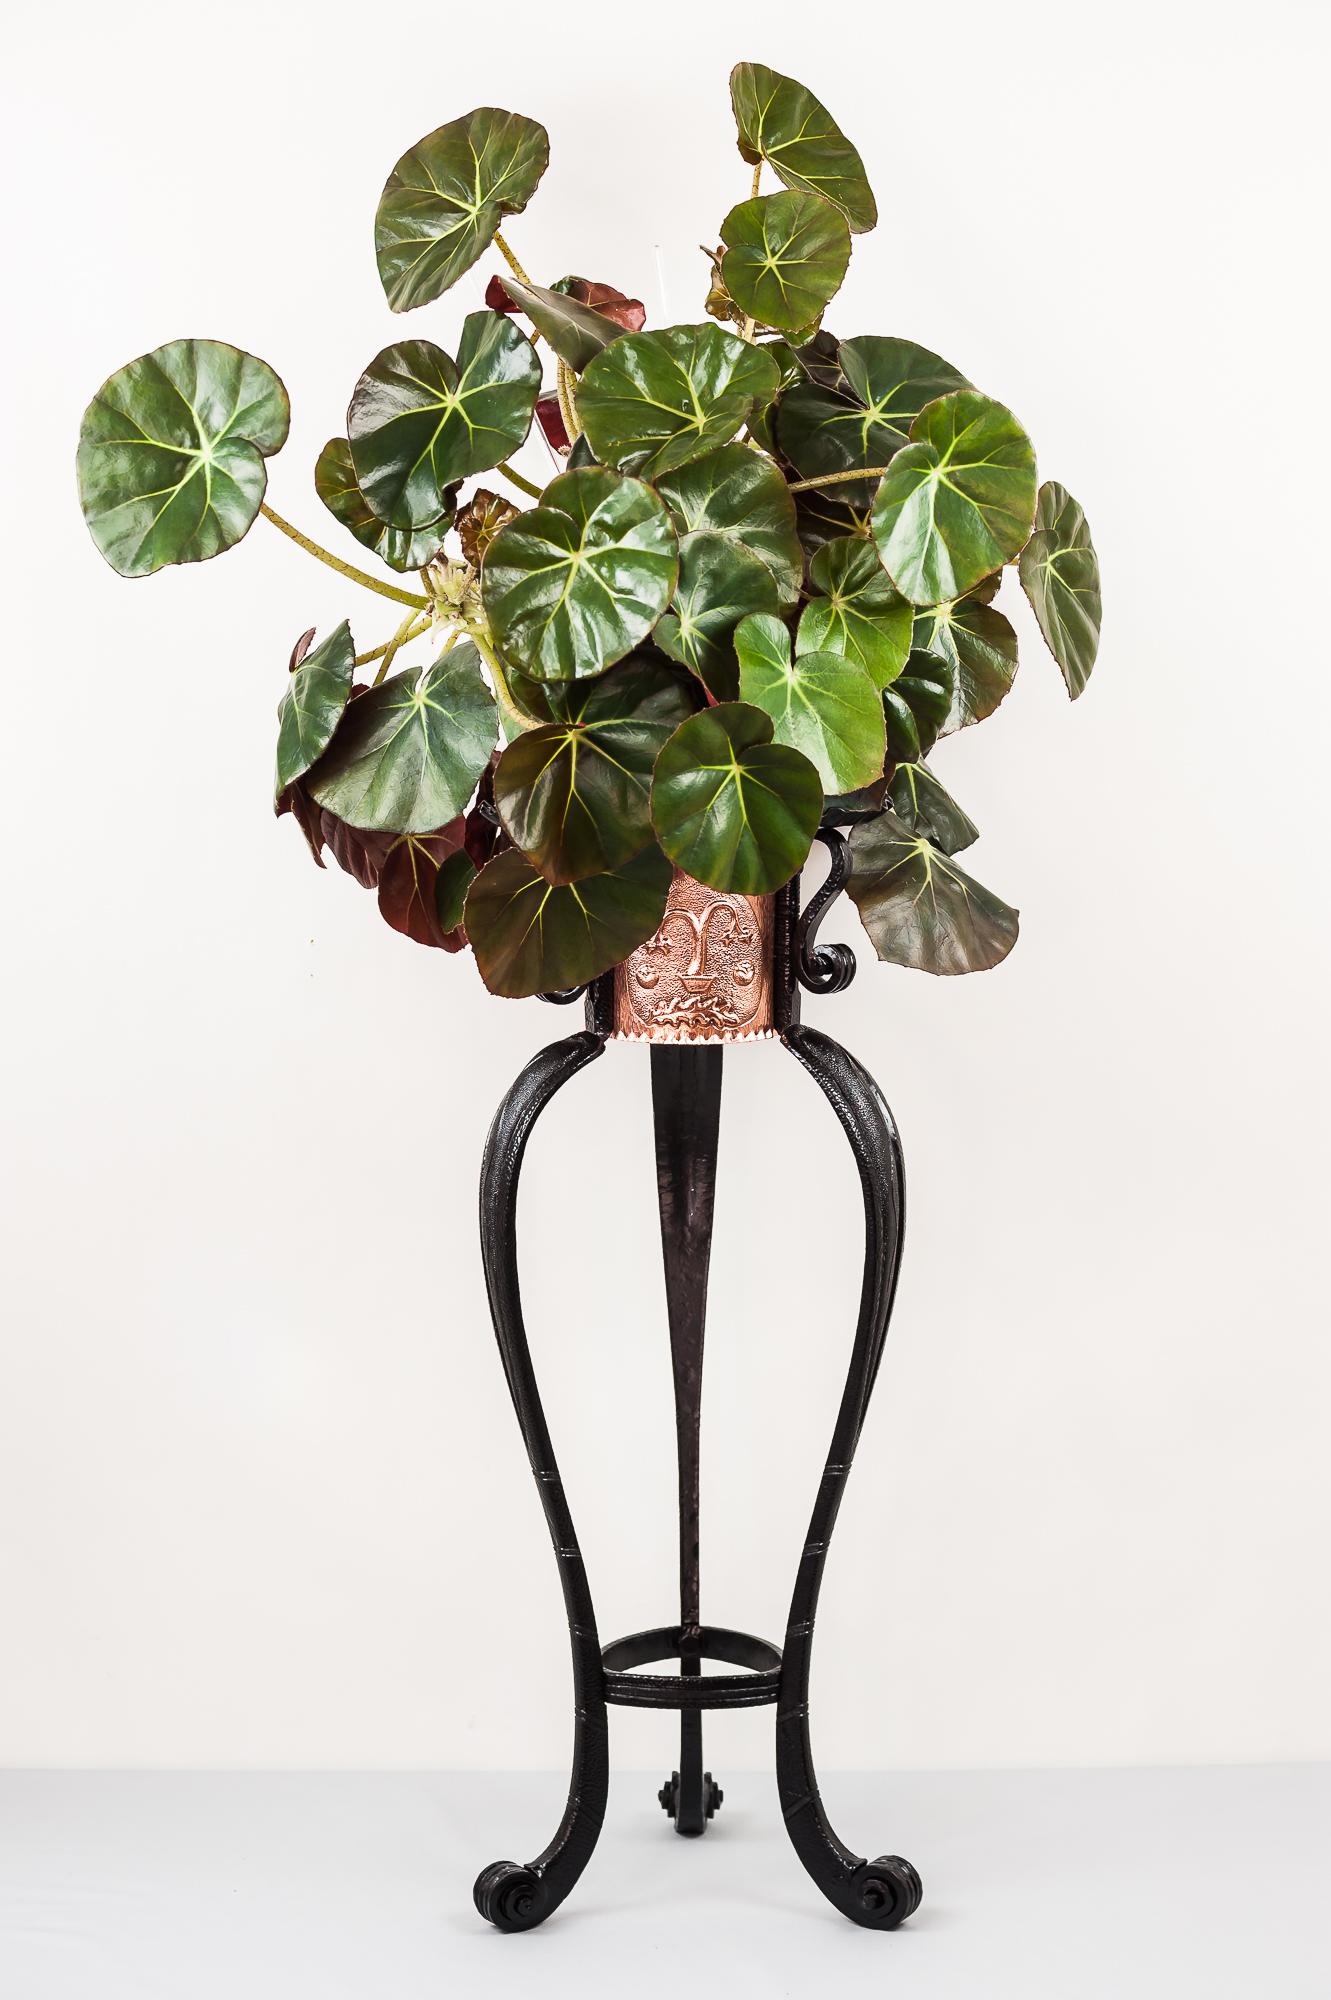 A beautiful example of a hammered Art Deco flower table stand, circa 1920s
Polished and stove enameled copper
Iron blackened.

(The flower is not for sale, just for the photo shoot.)